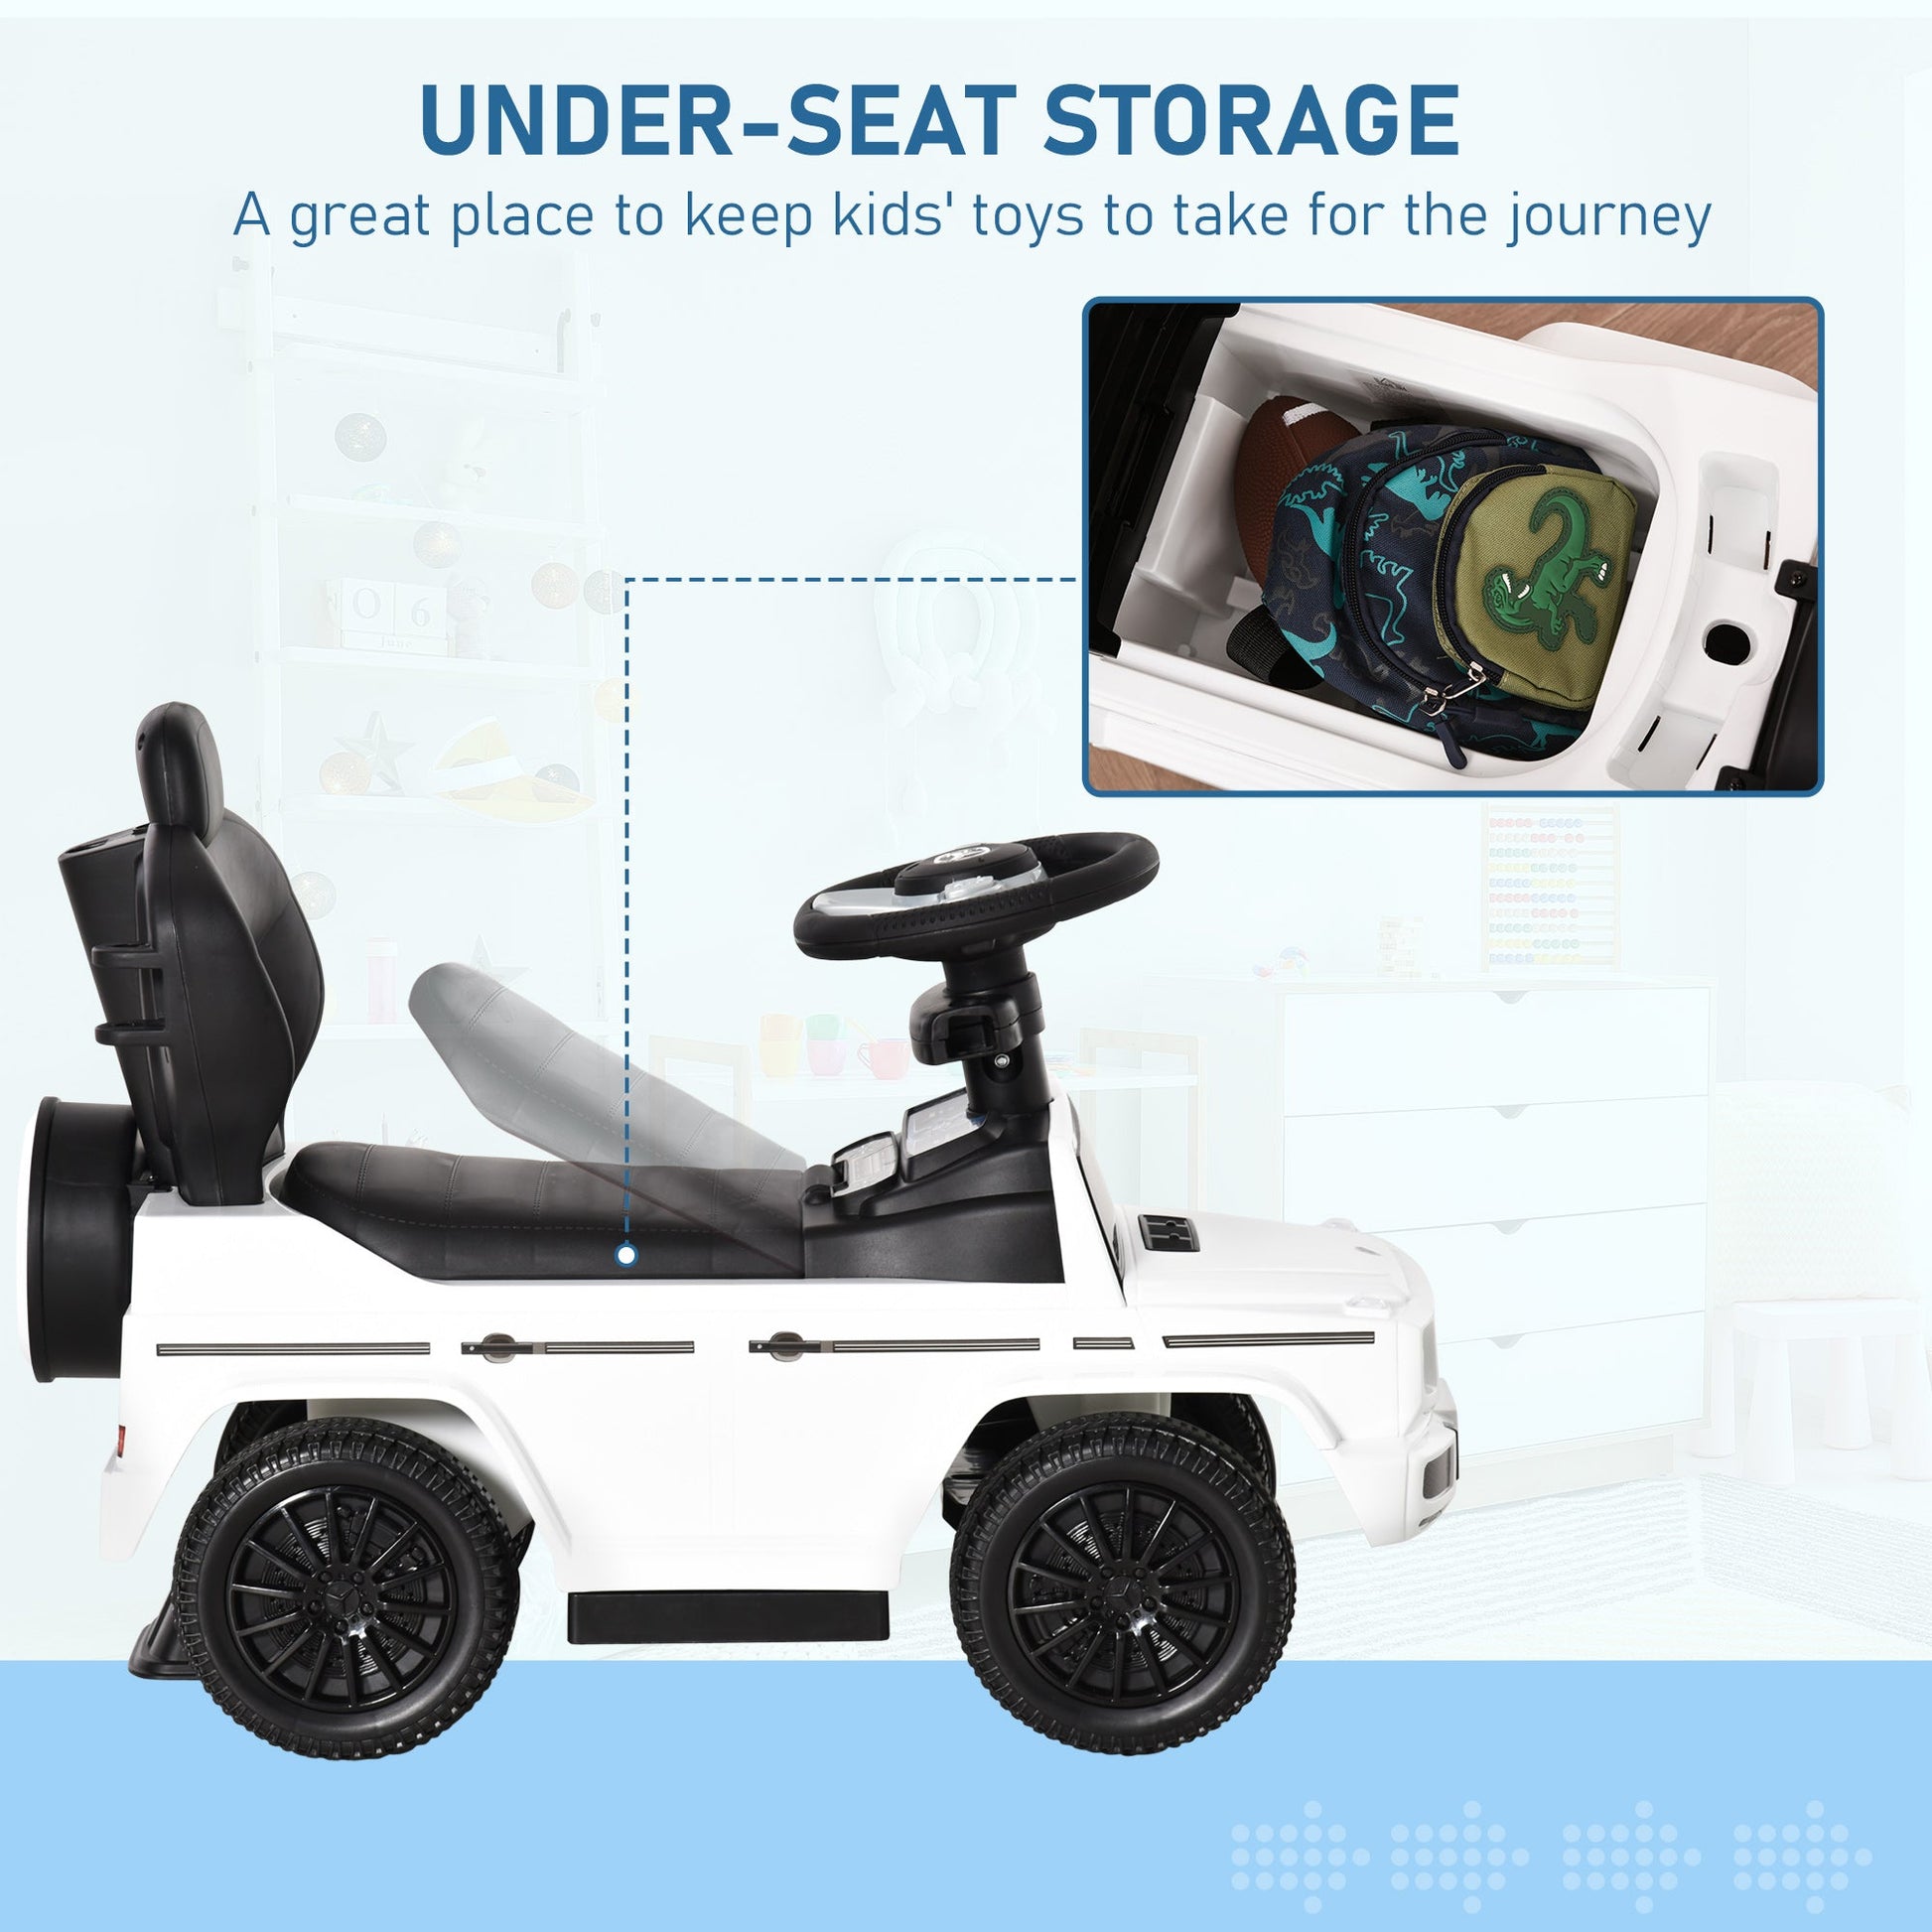 Compatible Ride-on Sliding Car G350 Walker Foot to Floor Slider Stroller Toddler Vehicle Push-Along with Horn Steering Wheel NO POWER Manual Under Seat Storage Safe Design, White - Gallery Canada